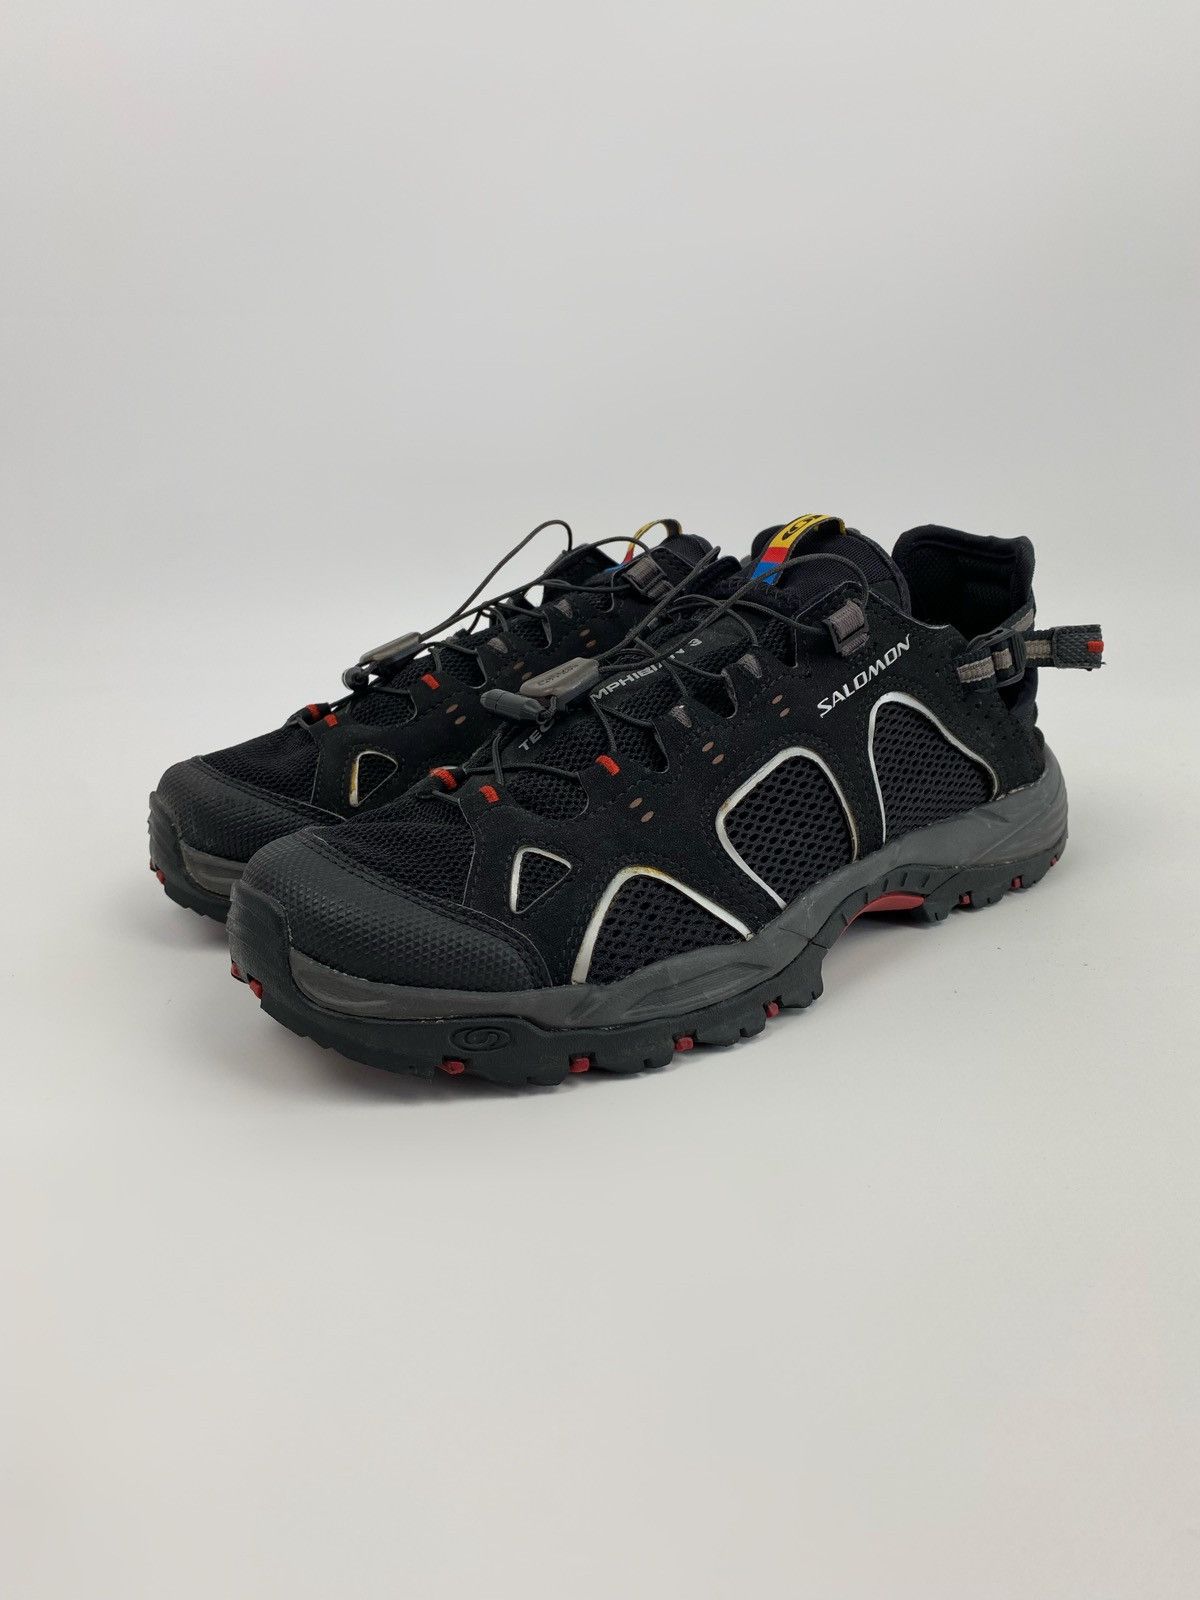 Pre-owned Outdoor Life X Salomon 2012 Salomon Techamphibian 3 Vented Hiking Shoes In Black/red/grey